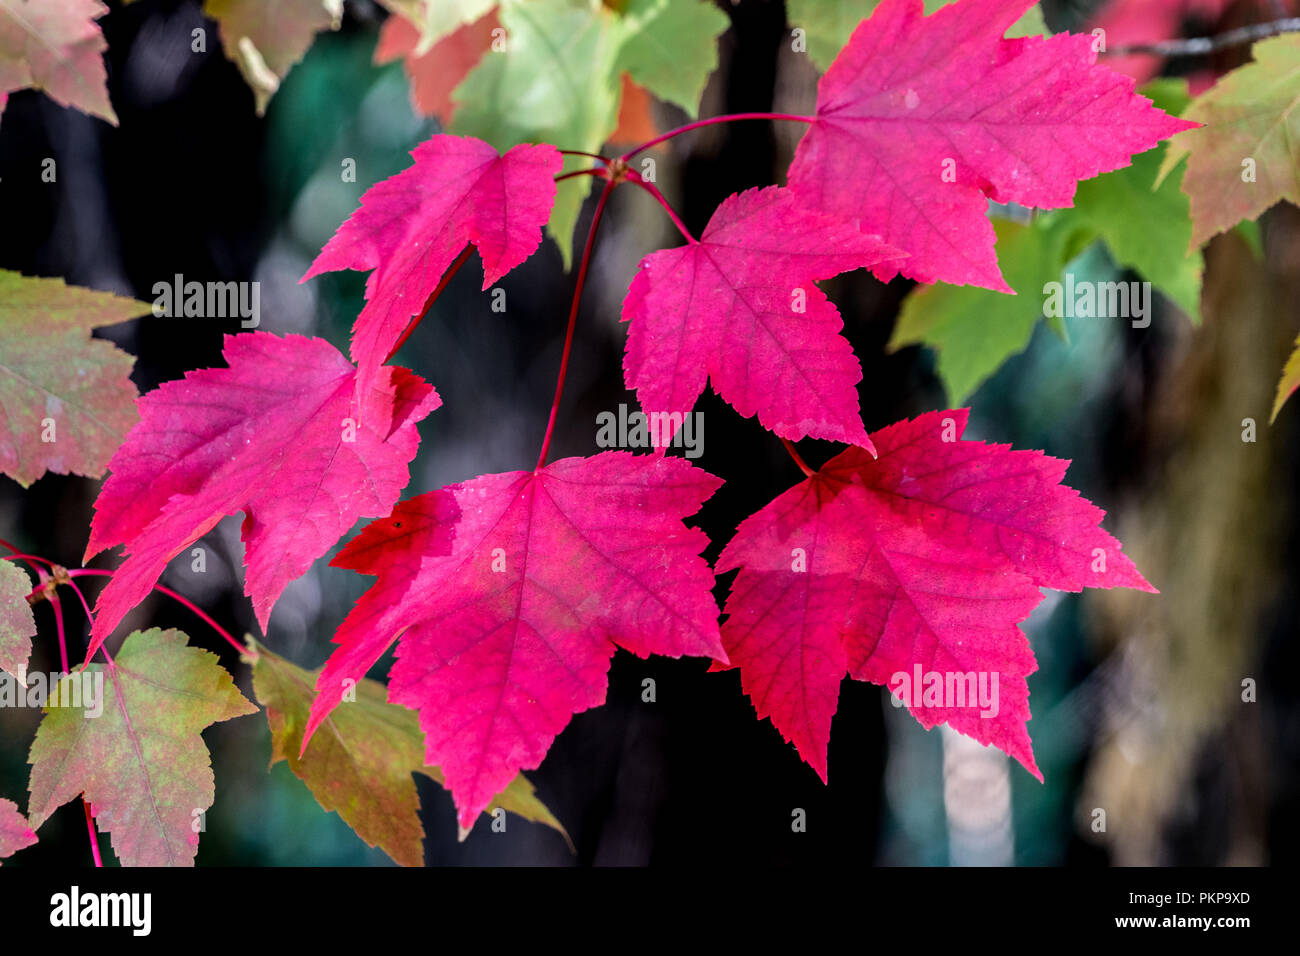 Closeup of a group of six bright crimson leaves amongst green and brown foliage ,on the tree in autumn Stock Photo